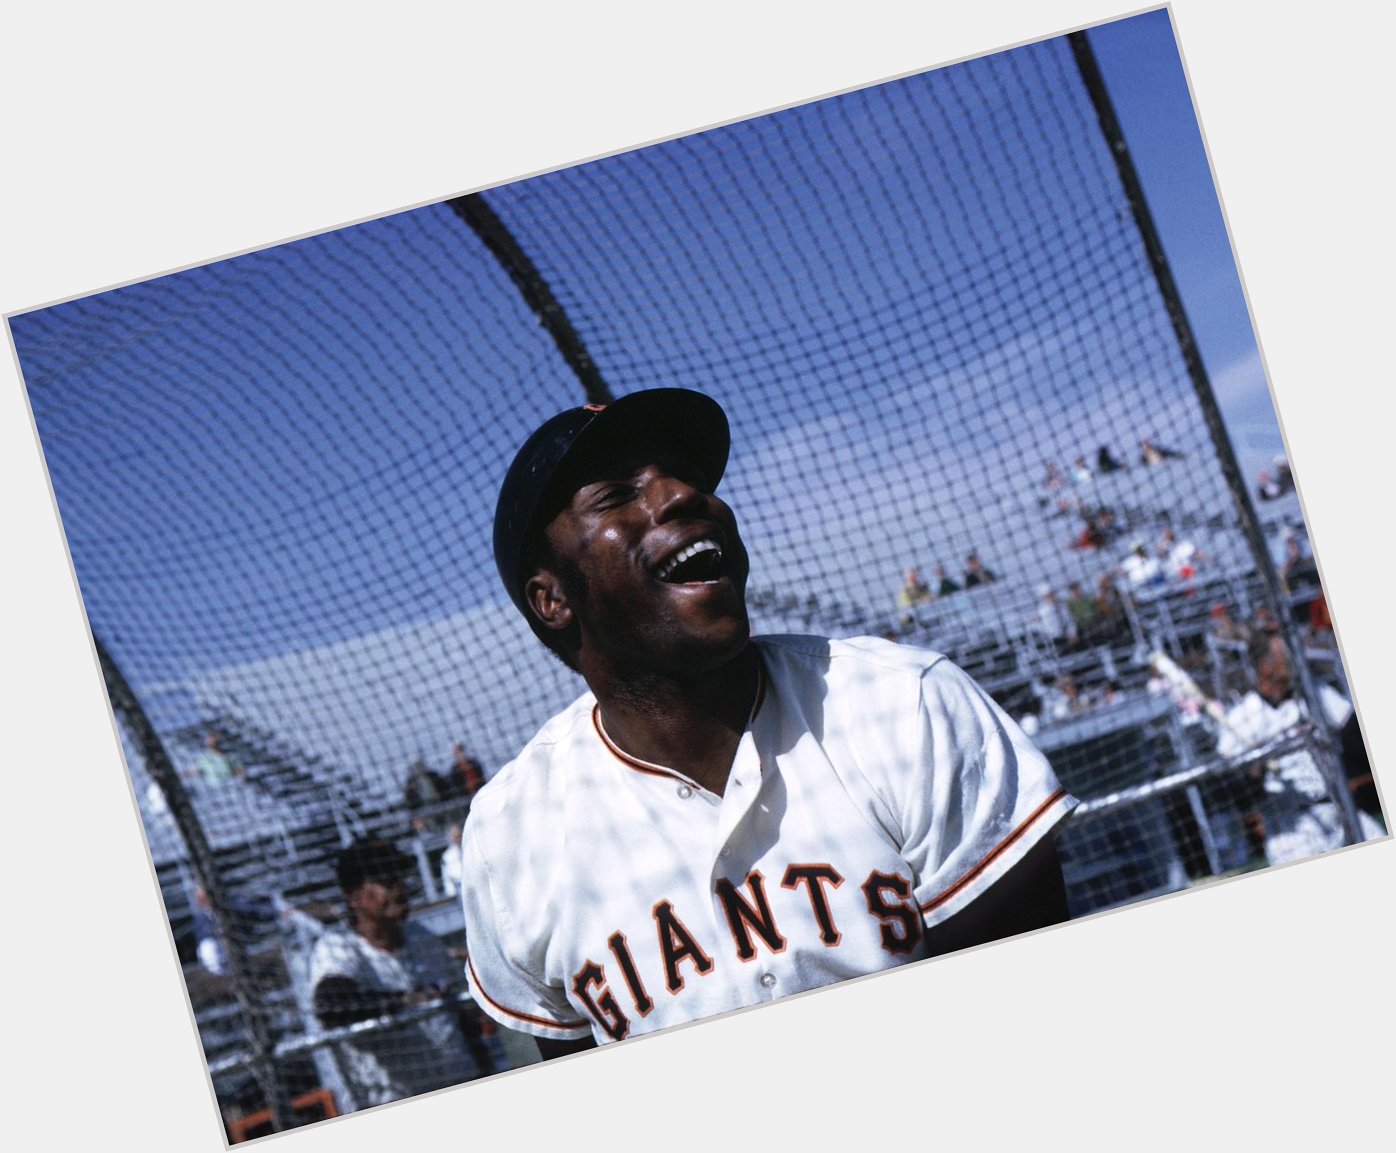 Remembering Willie McCovey on what would have been his 83rd birthday. 

Happy Birthday, Stretch! 